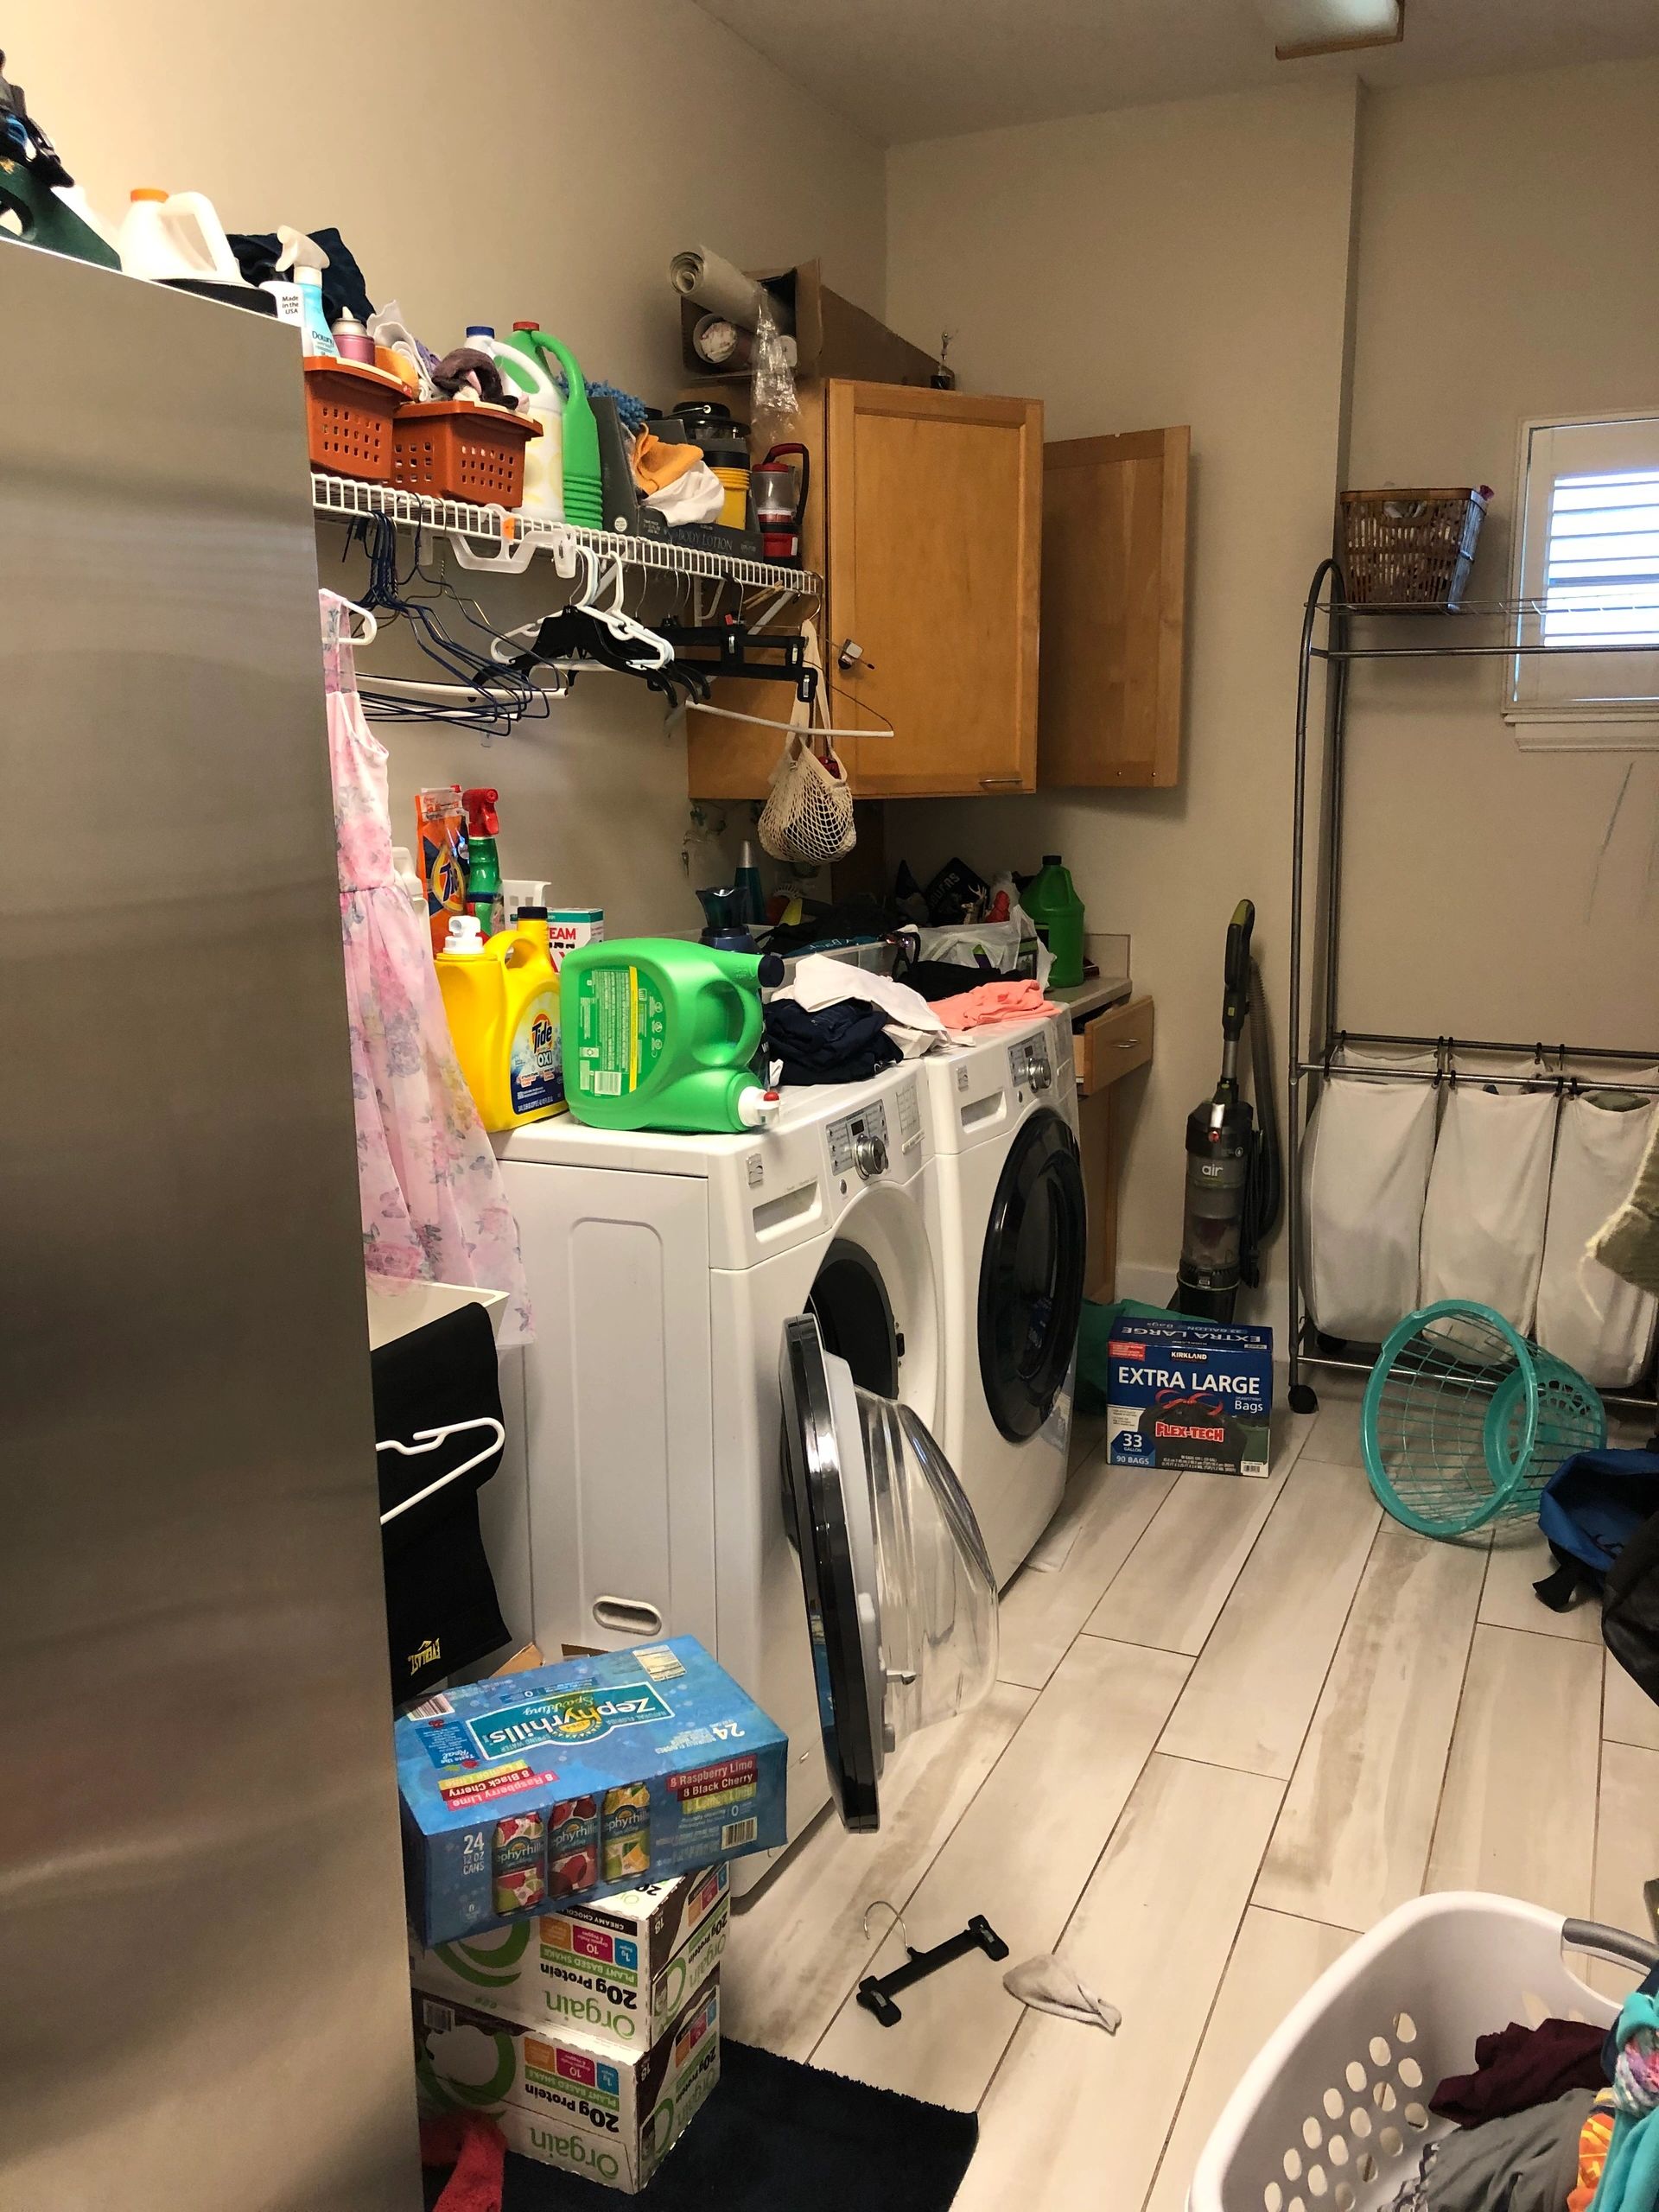 A messy laundry room